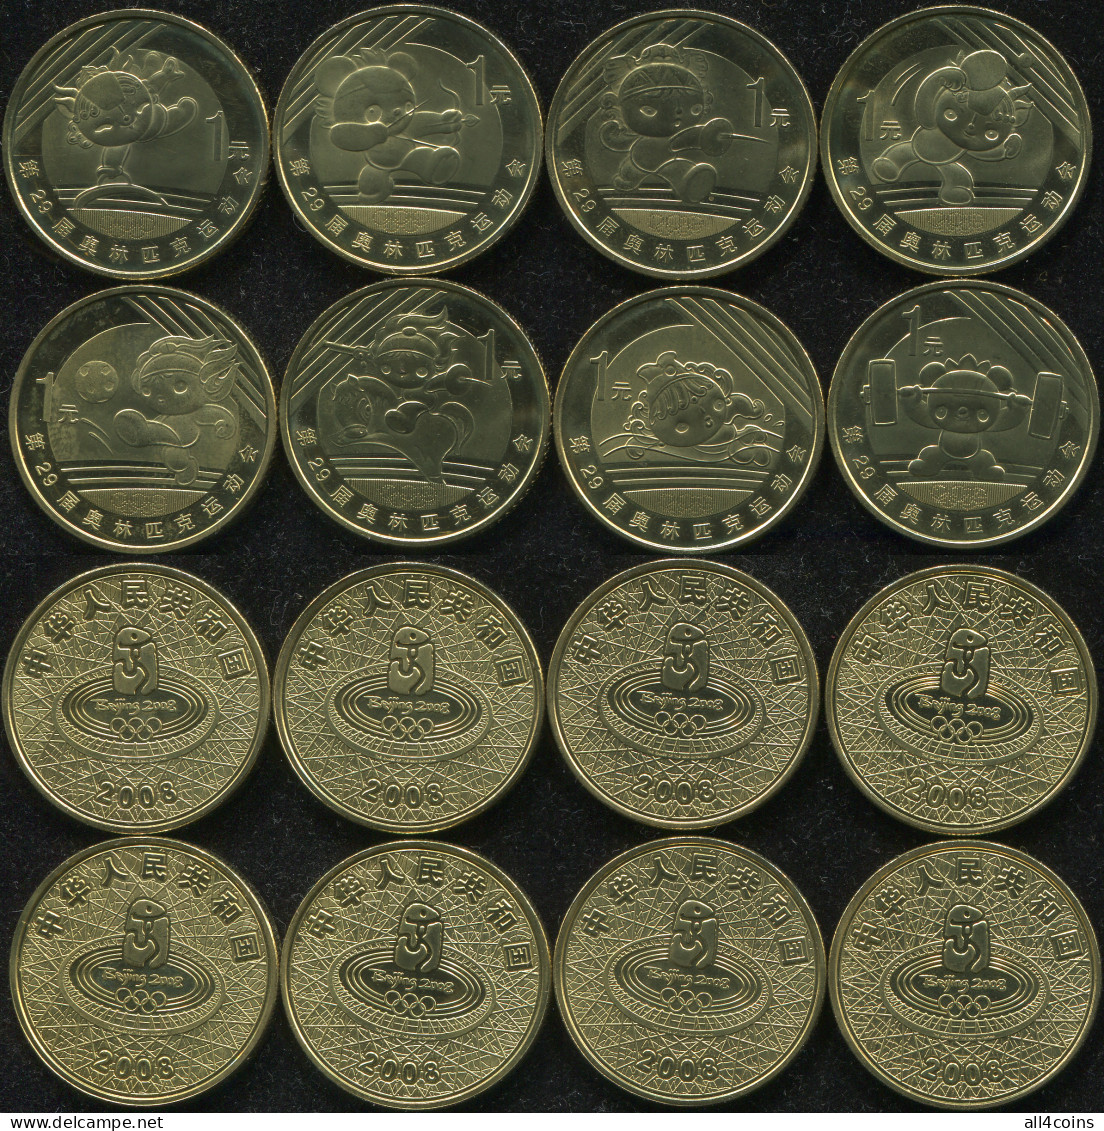 China Coins Set #4. 2008 (8 Coins. AUnc-Unc) Beijing 2008 Olympics - China